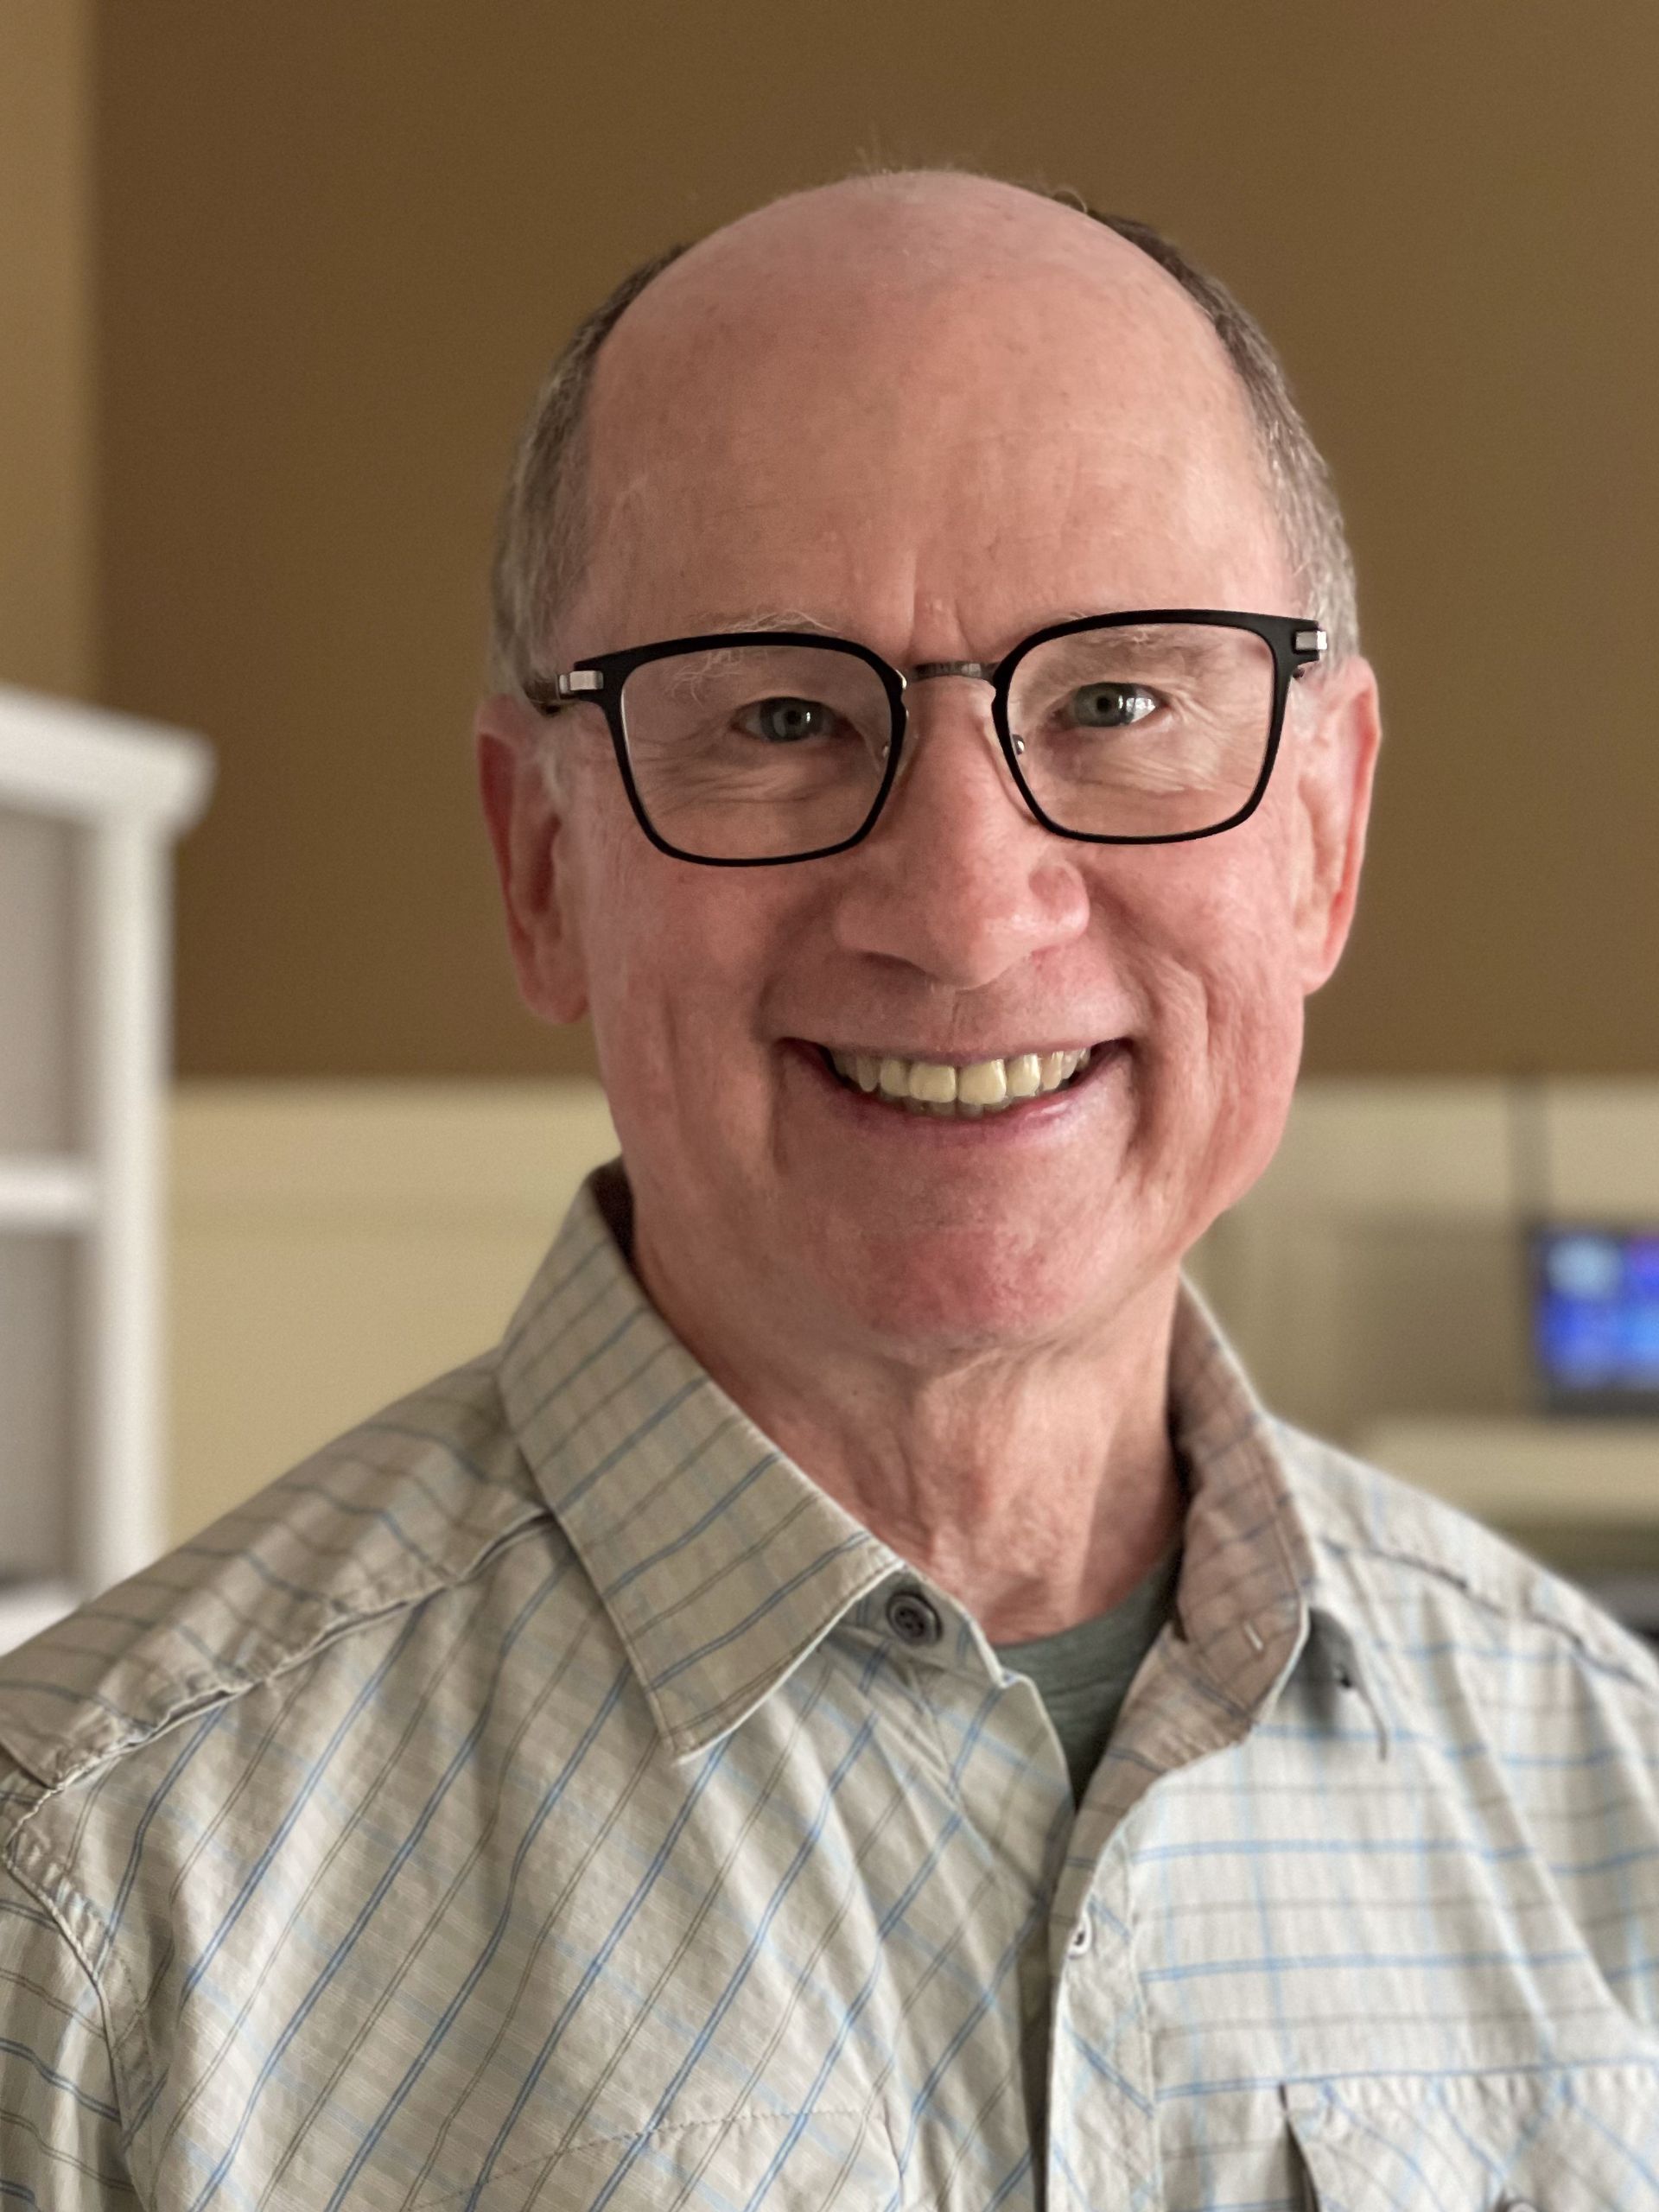 Ed Ketterer, a man wearing glasses and a plaid shirt smiles for the camera